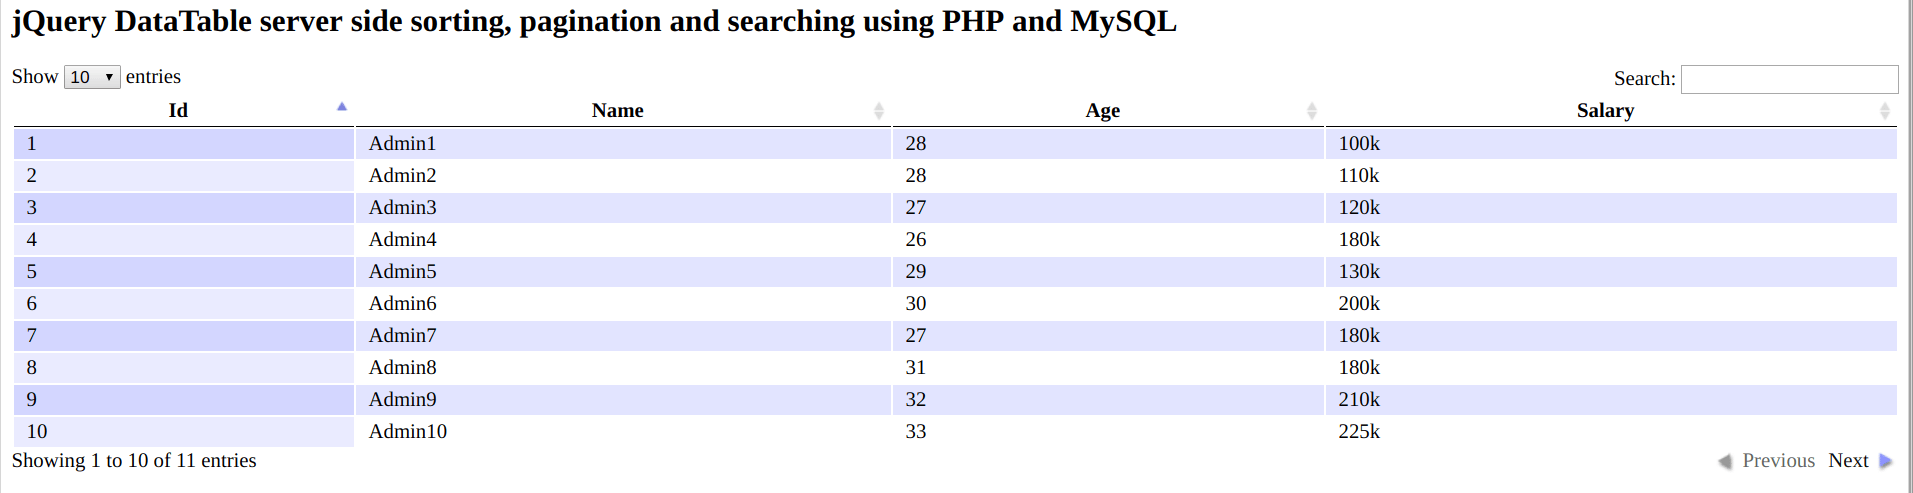 jQuery DataTable server side sorting,pagination and searching using PHP and MySQL